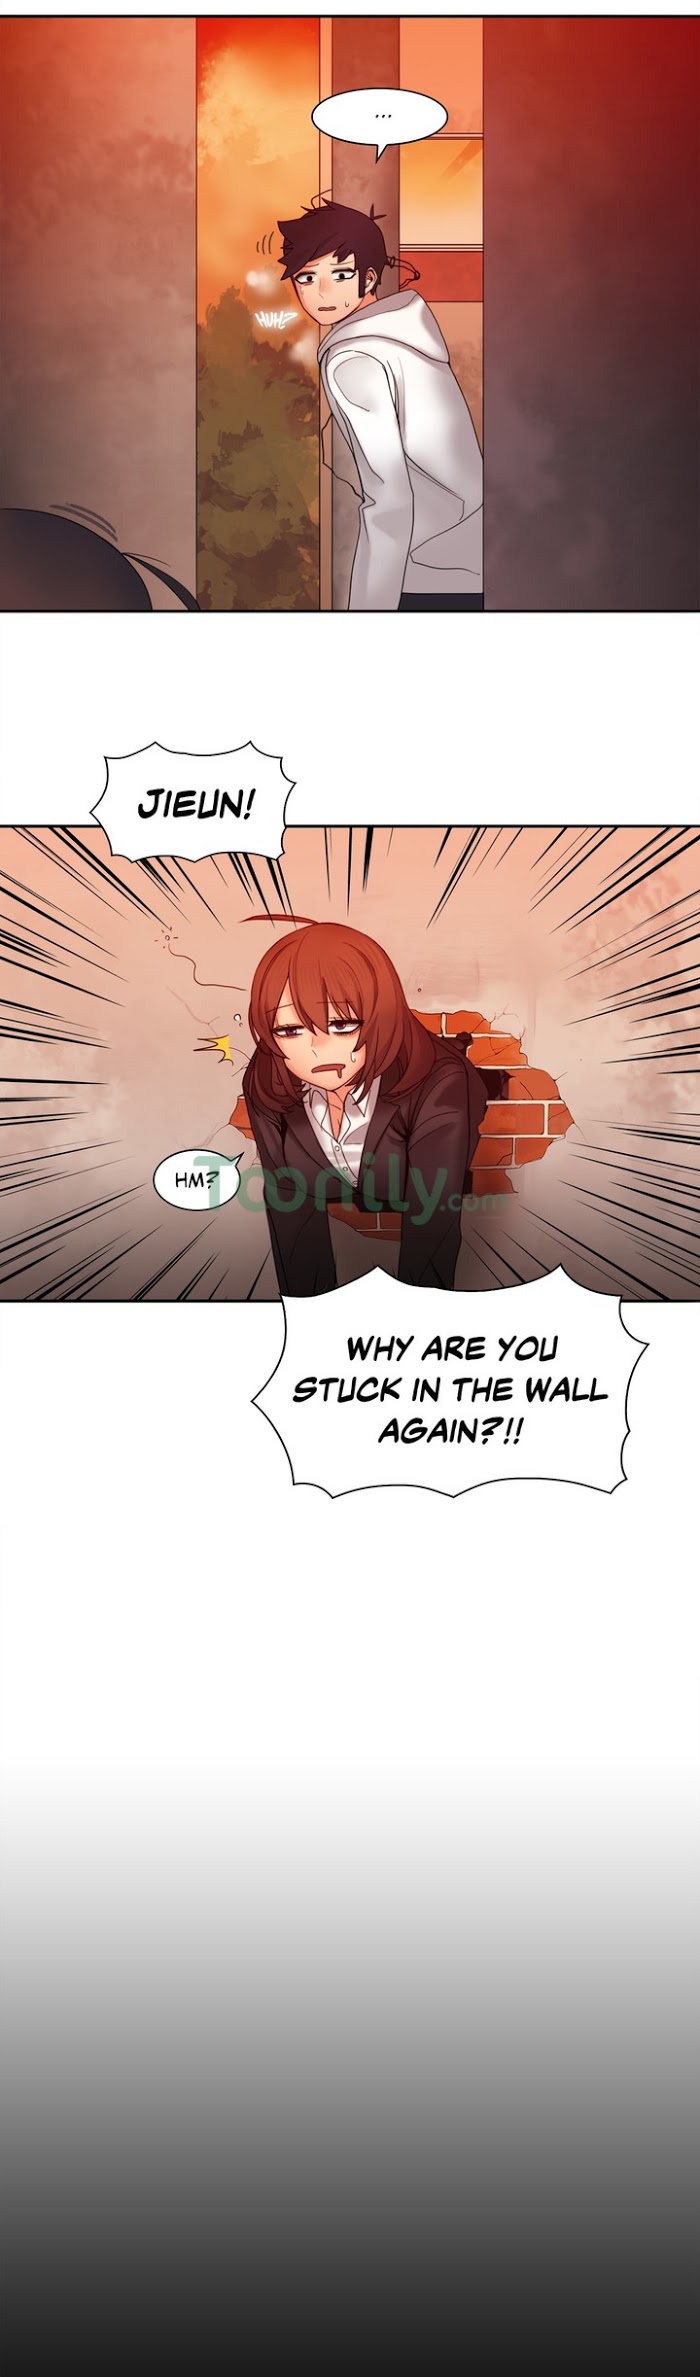 The Girl That Got Stuck in the Wall,Chapter 8, Latest chapte